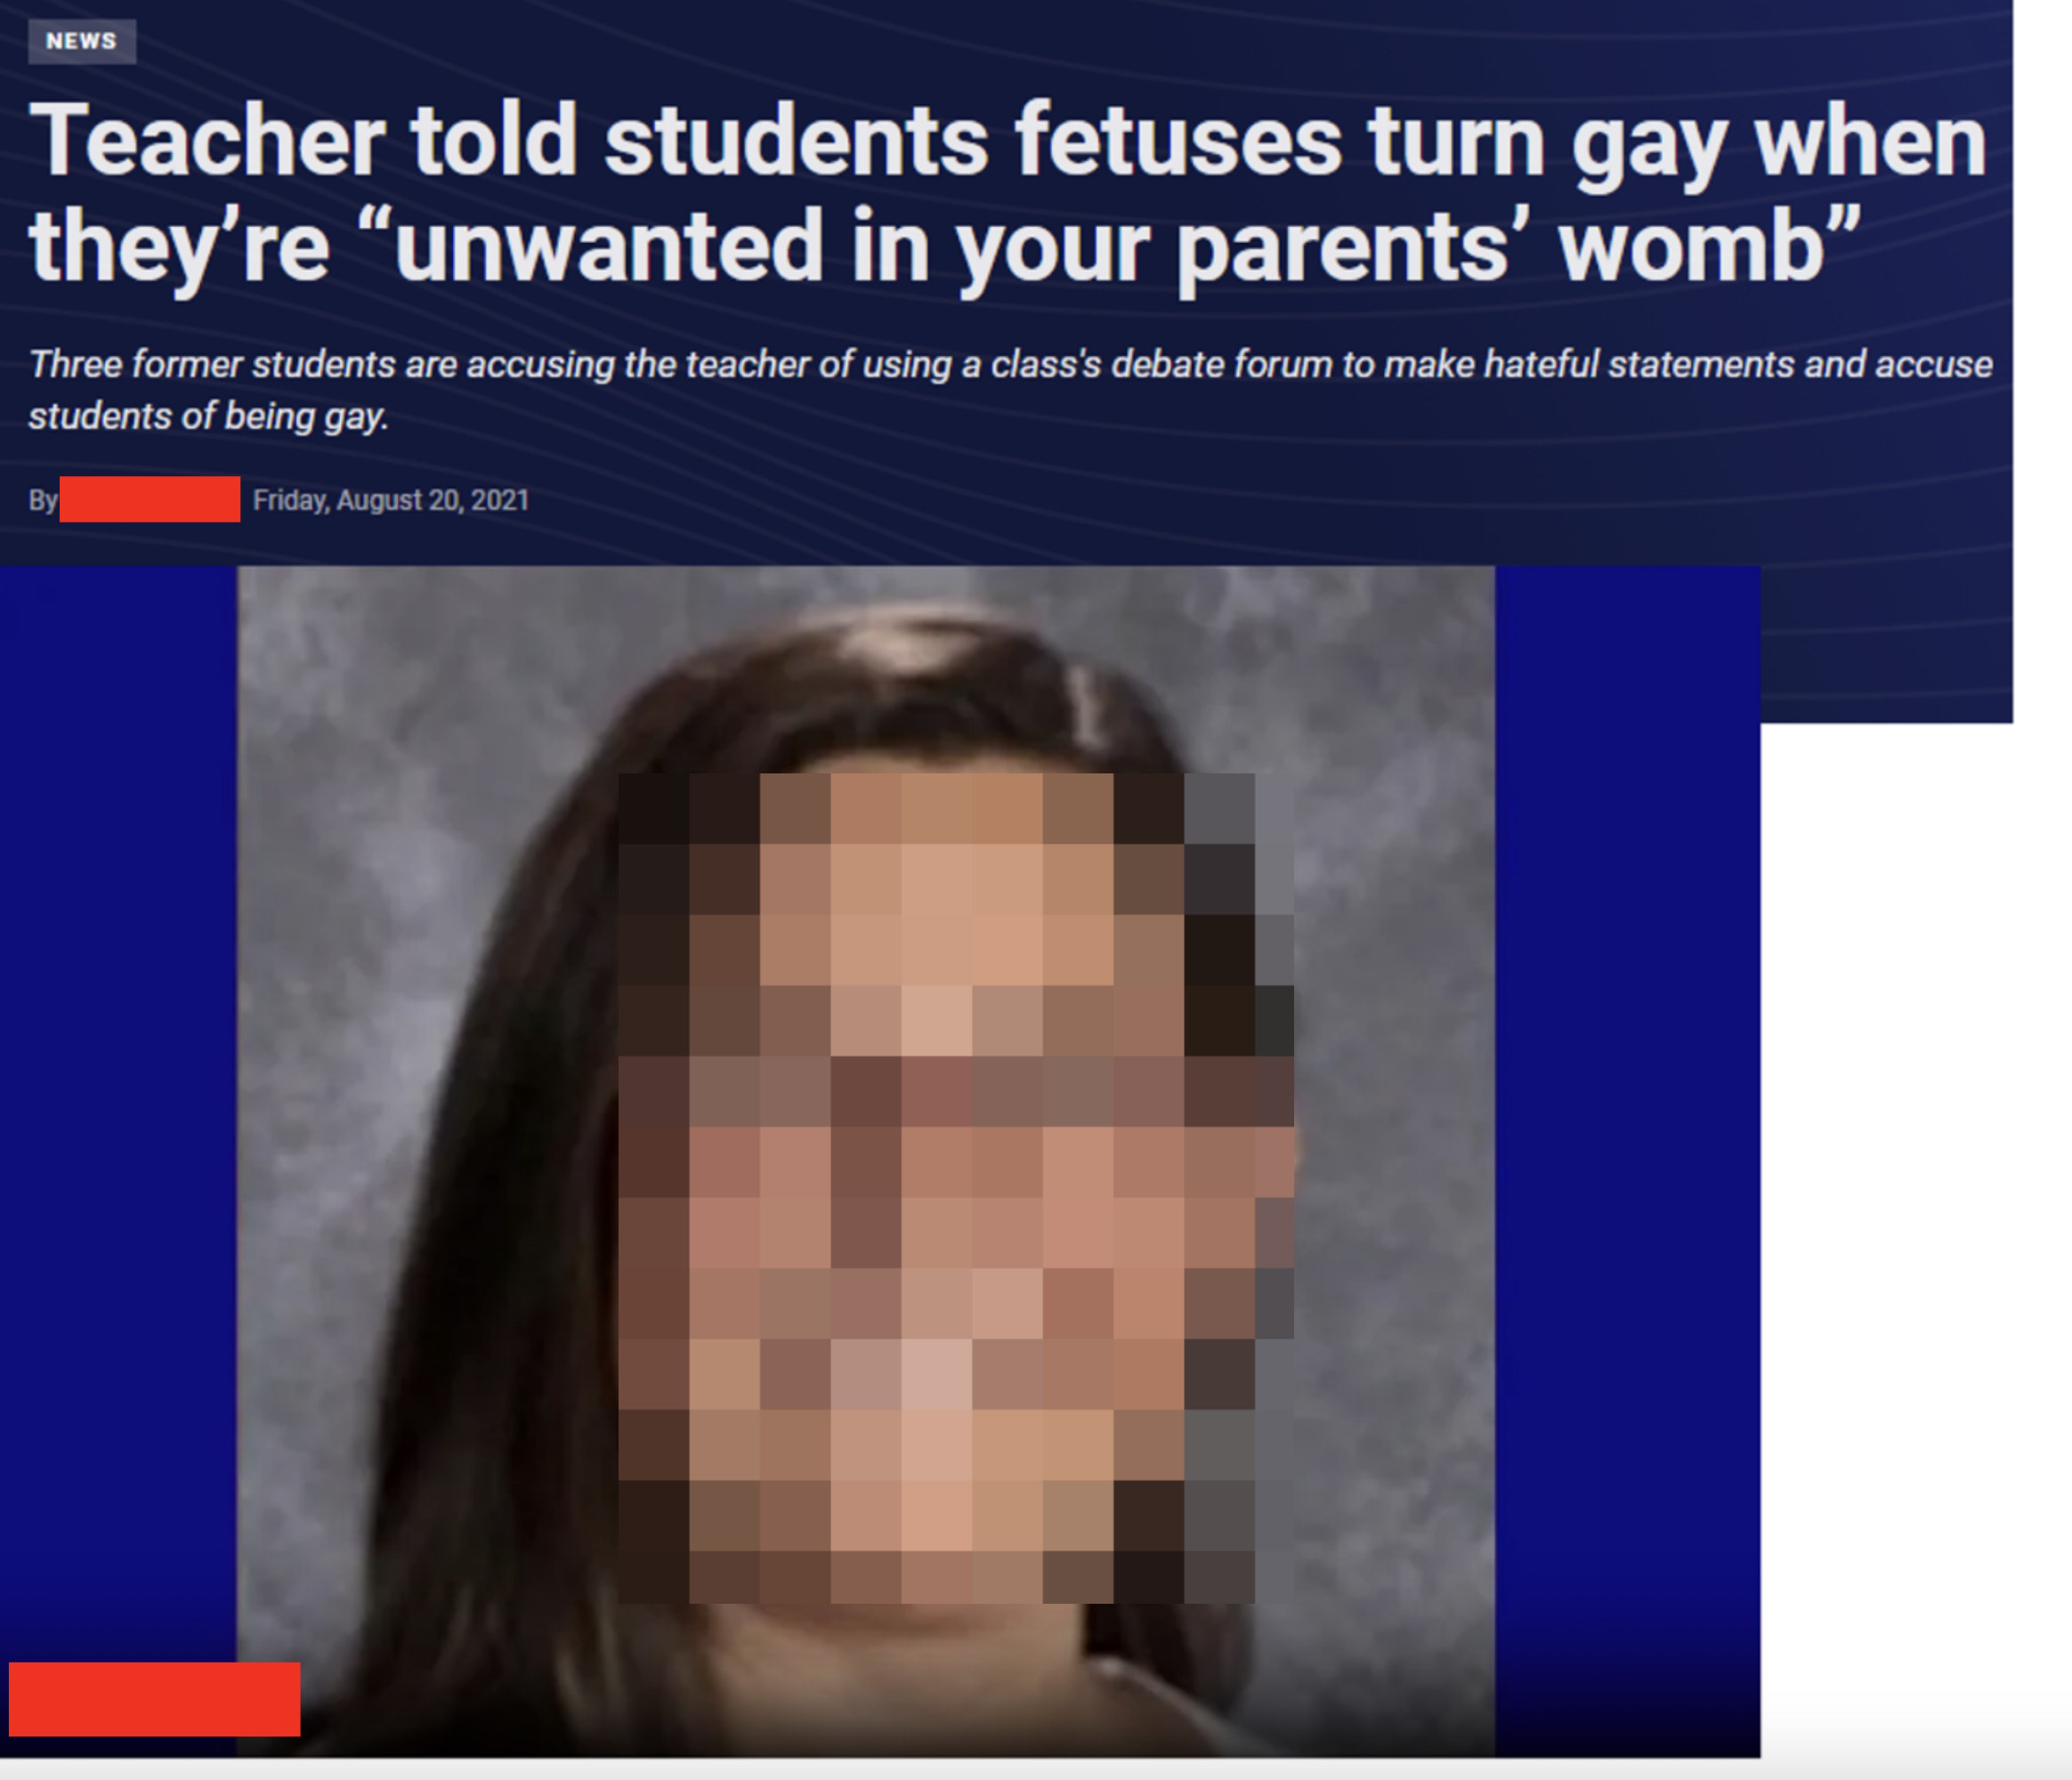 Article headline: &quot;Teacher told students fetuses turn gay when they&#x27;re &#x27;unwanted in your parents&#x27; womb&#x27;&quot;